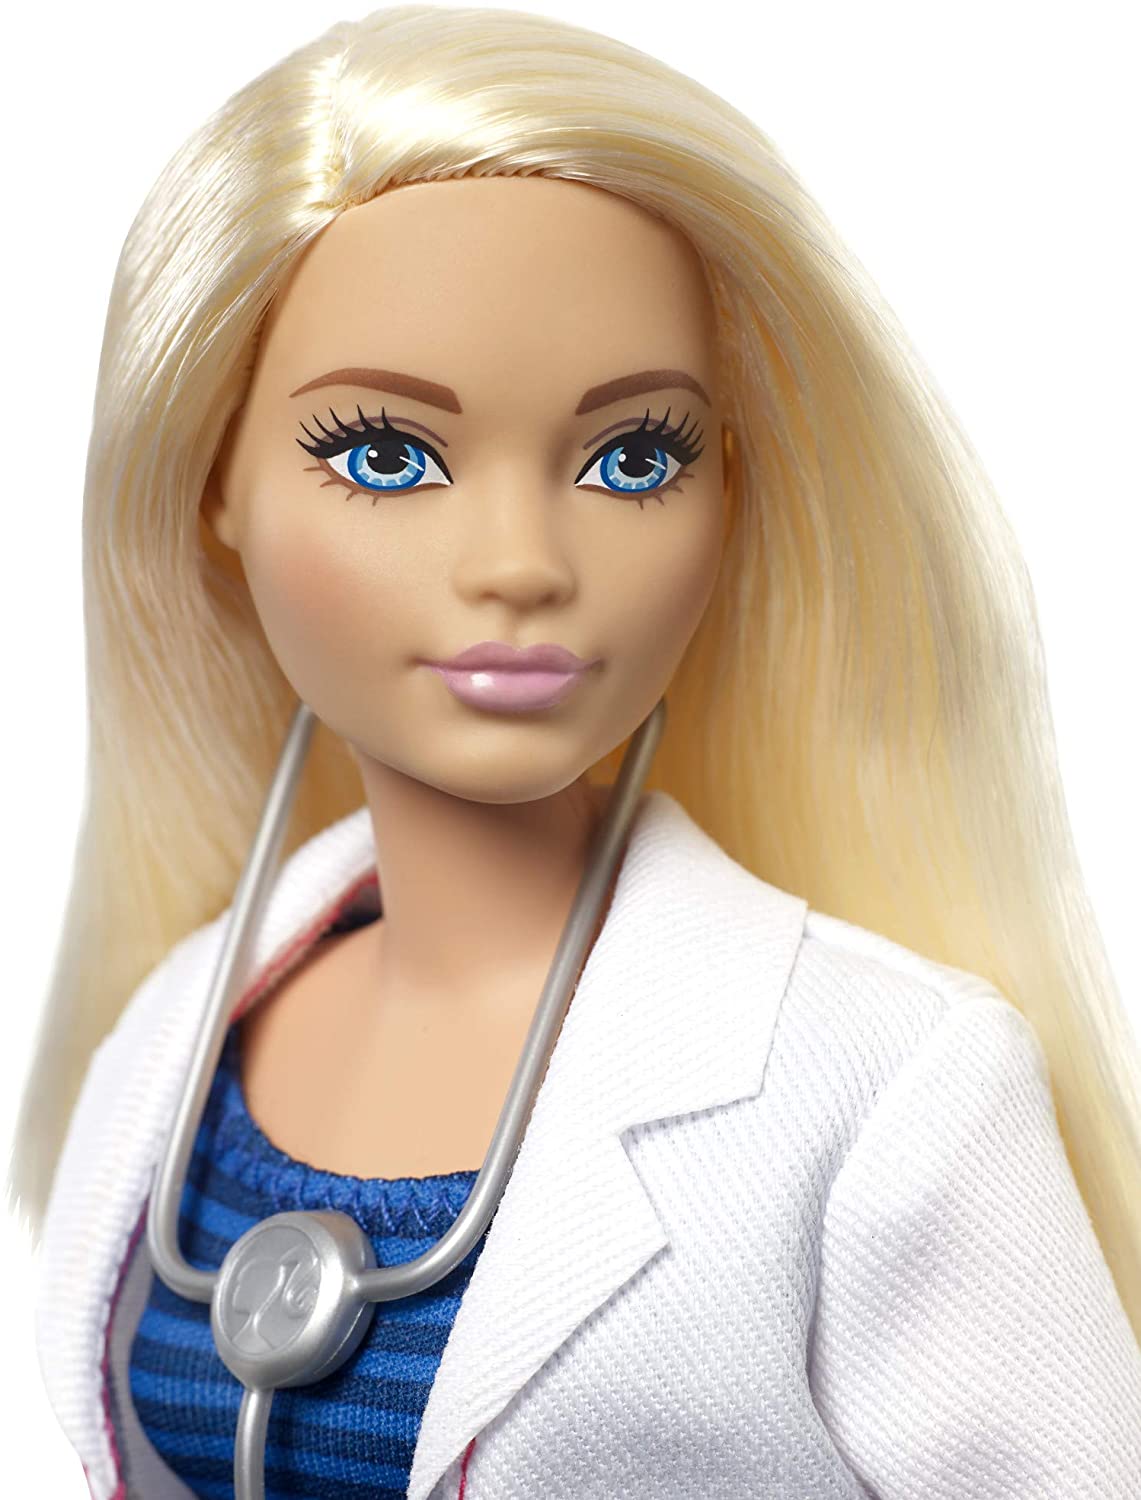 Barbie Careers Doctor Doll -  Blonde Hair with Stethoscope